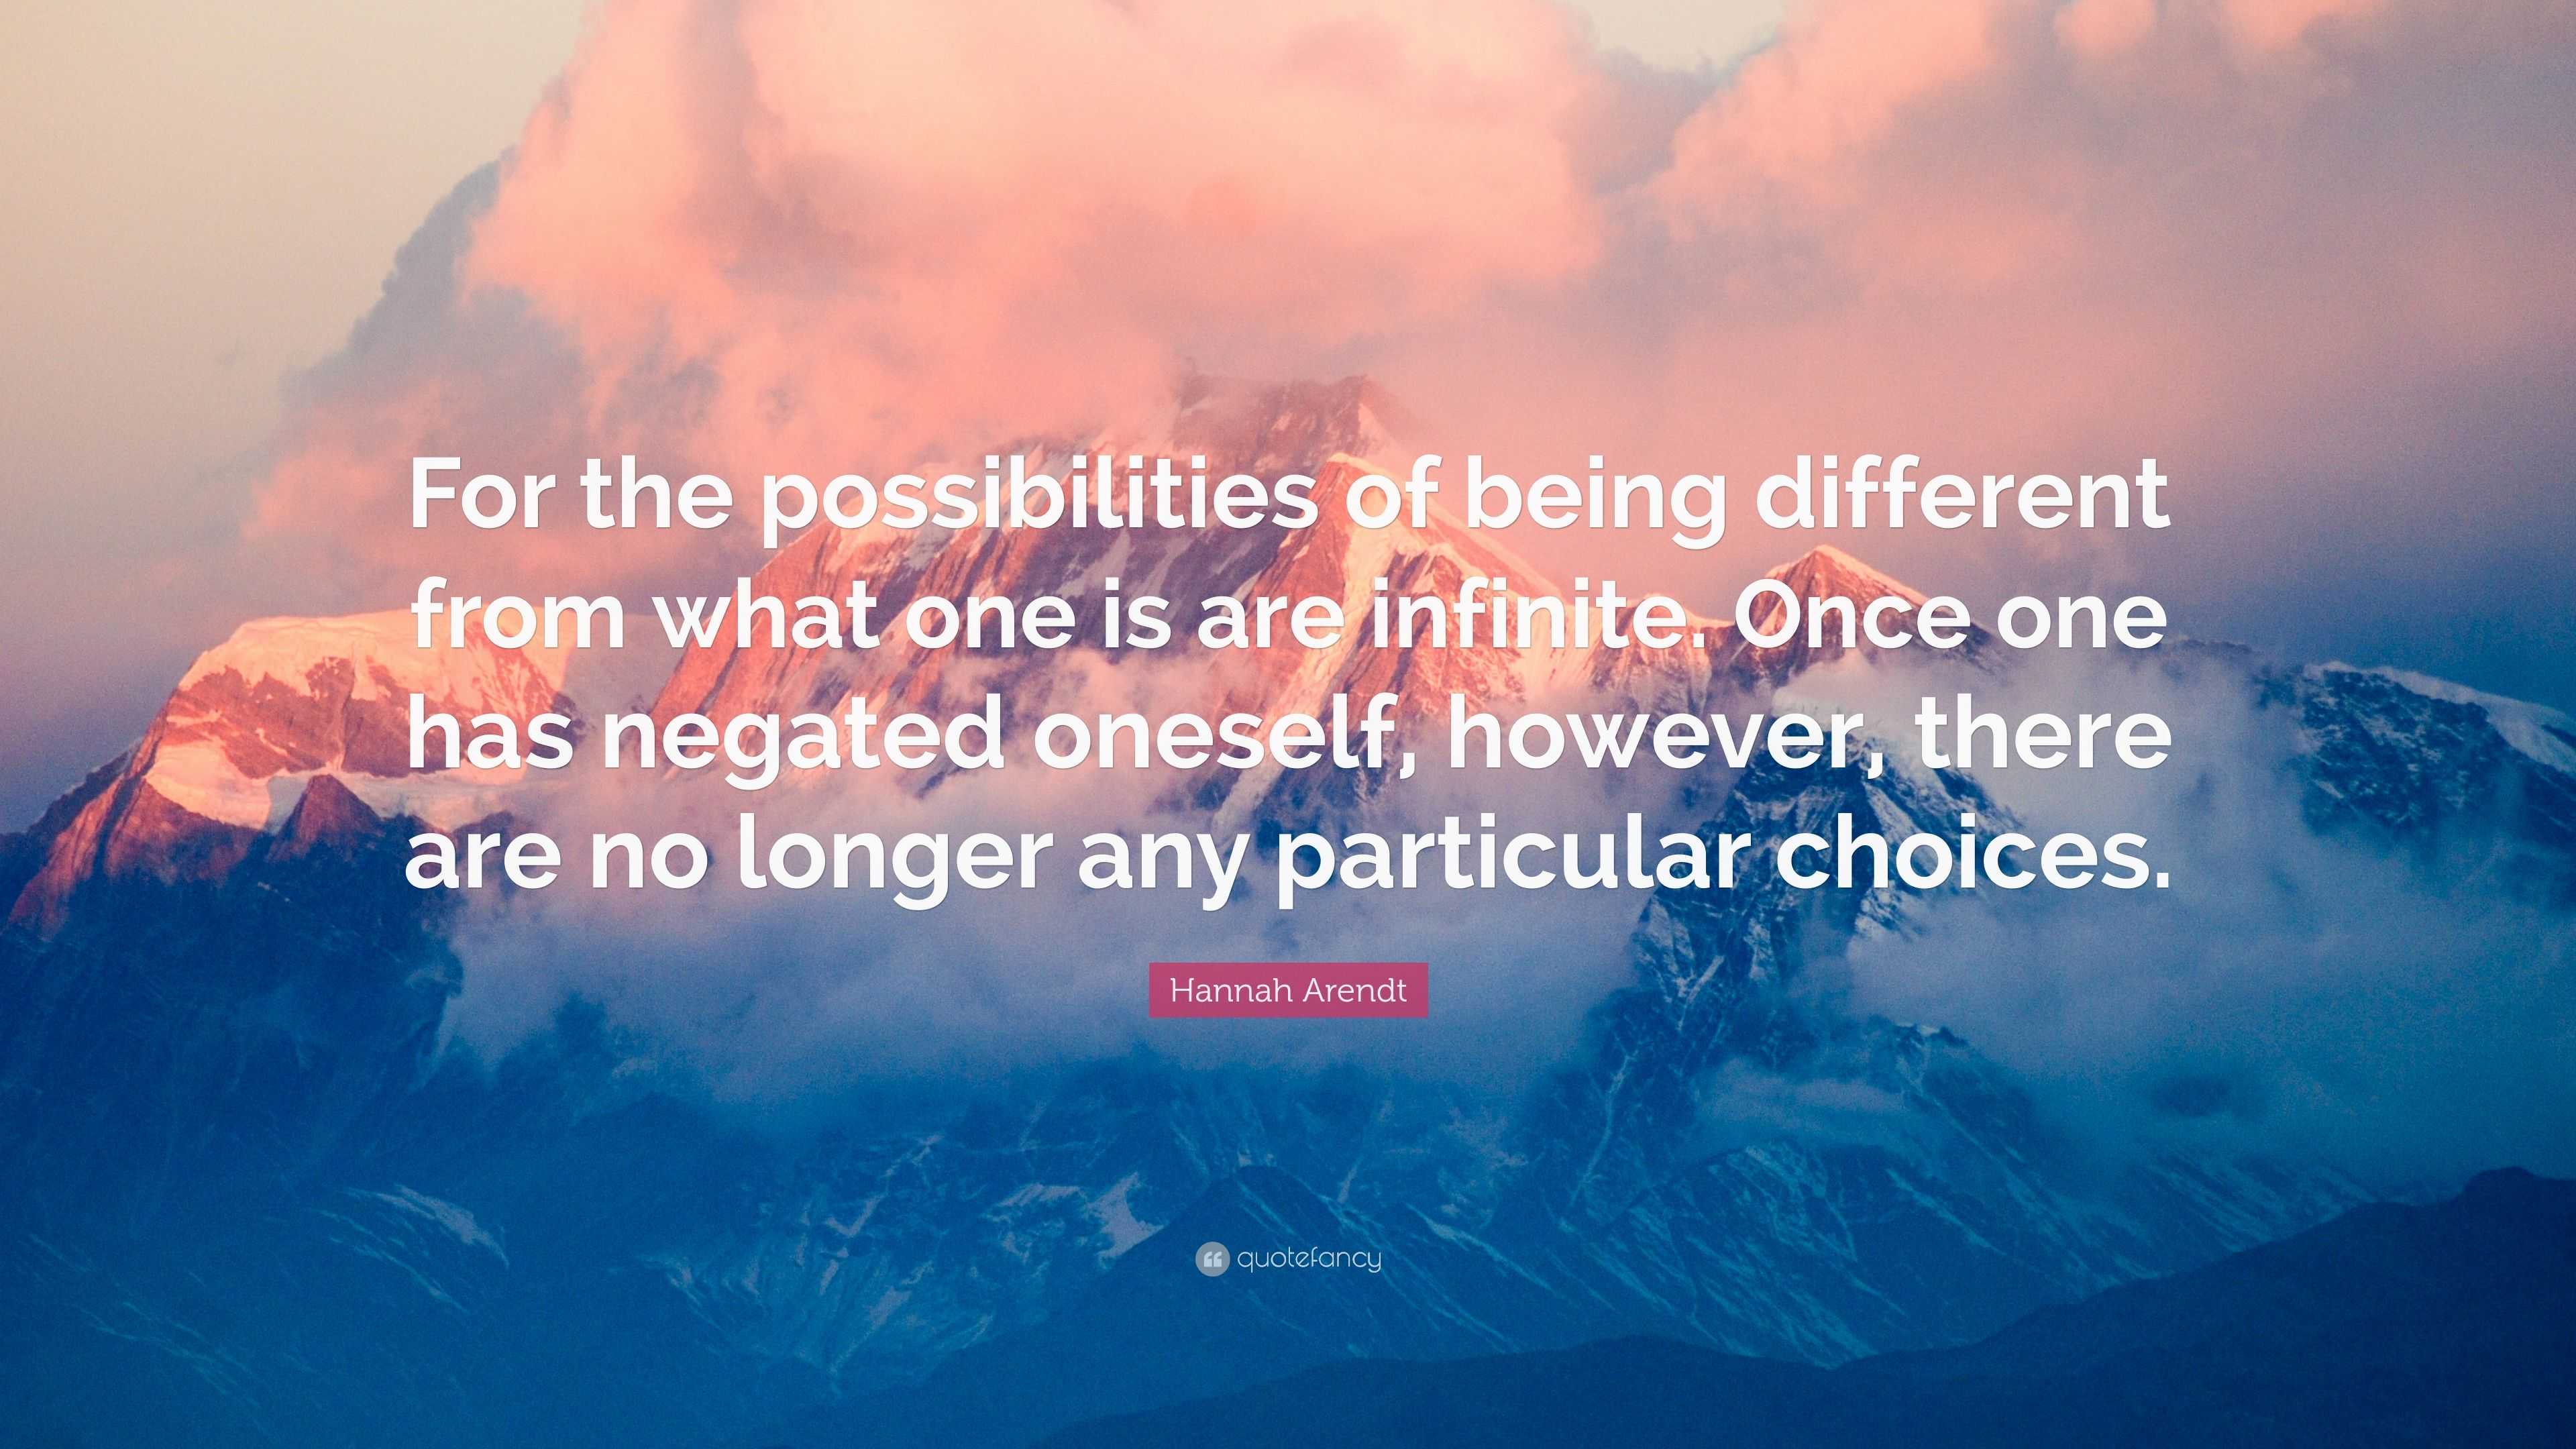 Hannah Arendt Quote: “For the possibilities of being different from ...